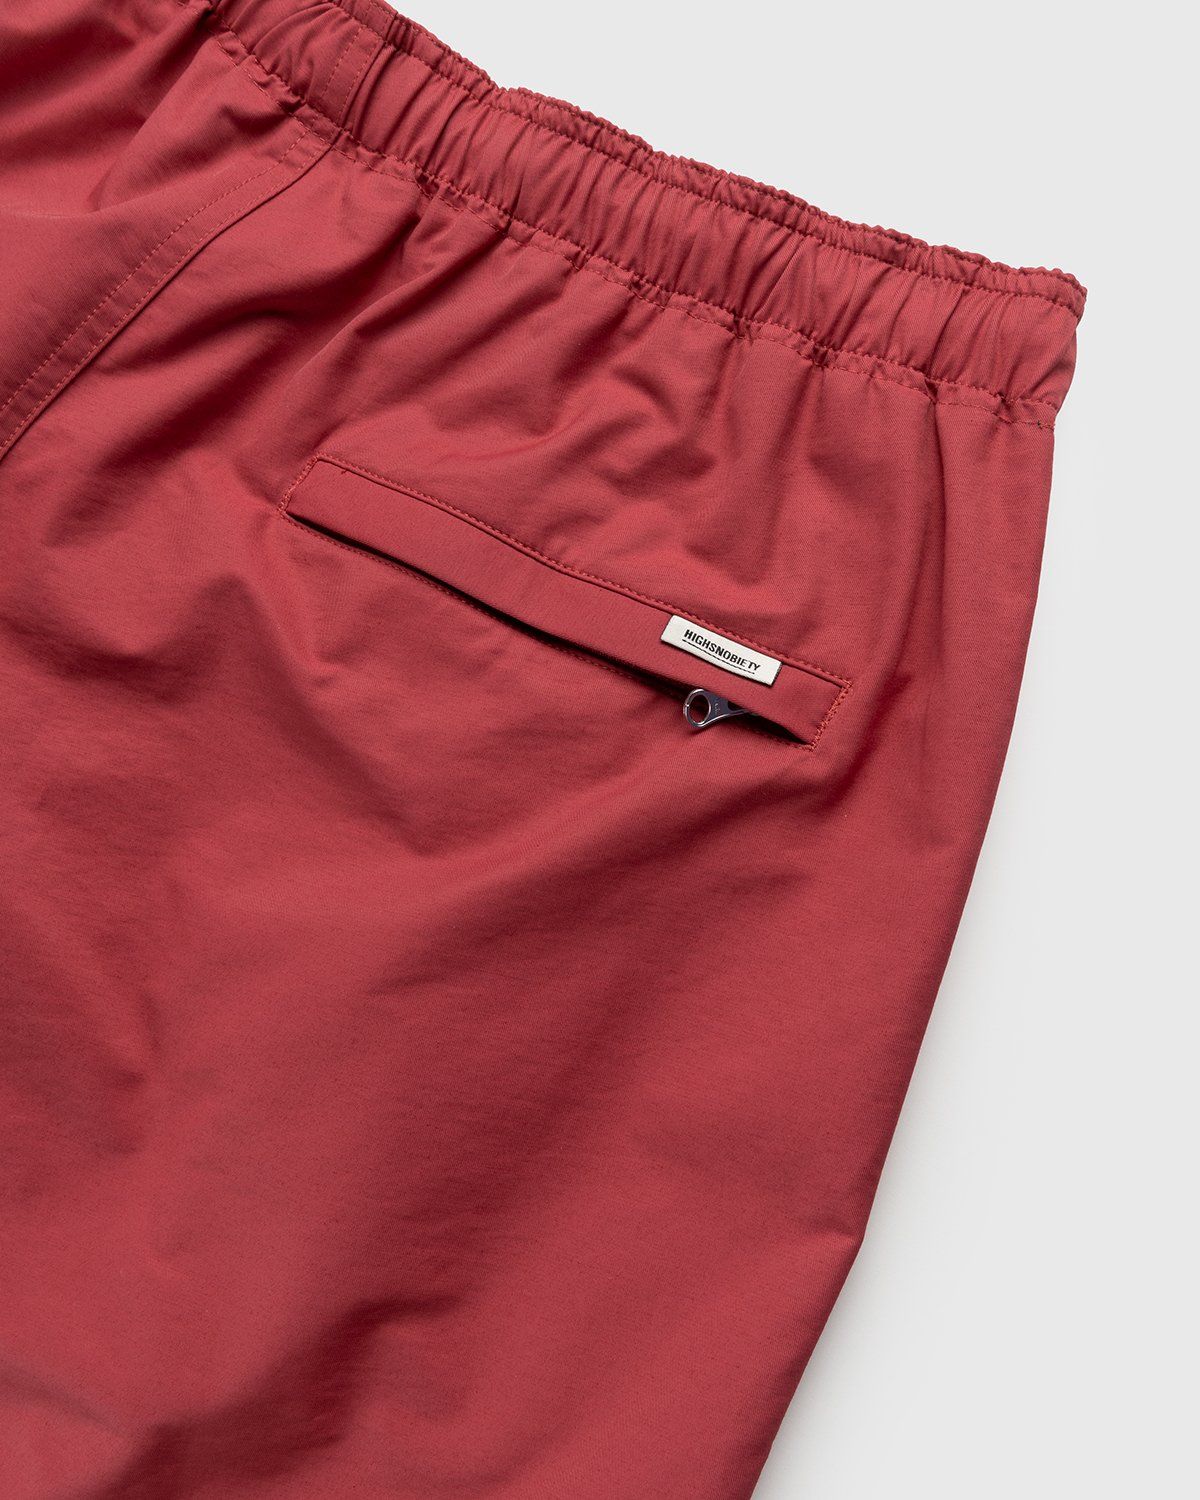 Highsnobiety – Cotton Nylon Water Short Red - Active Shorts - Pink - Image 4